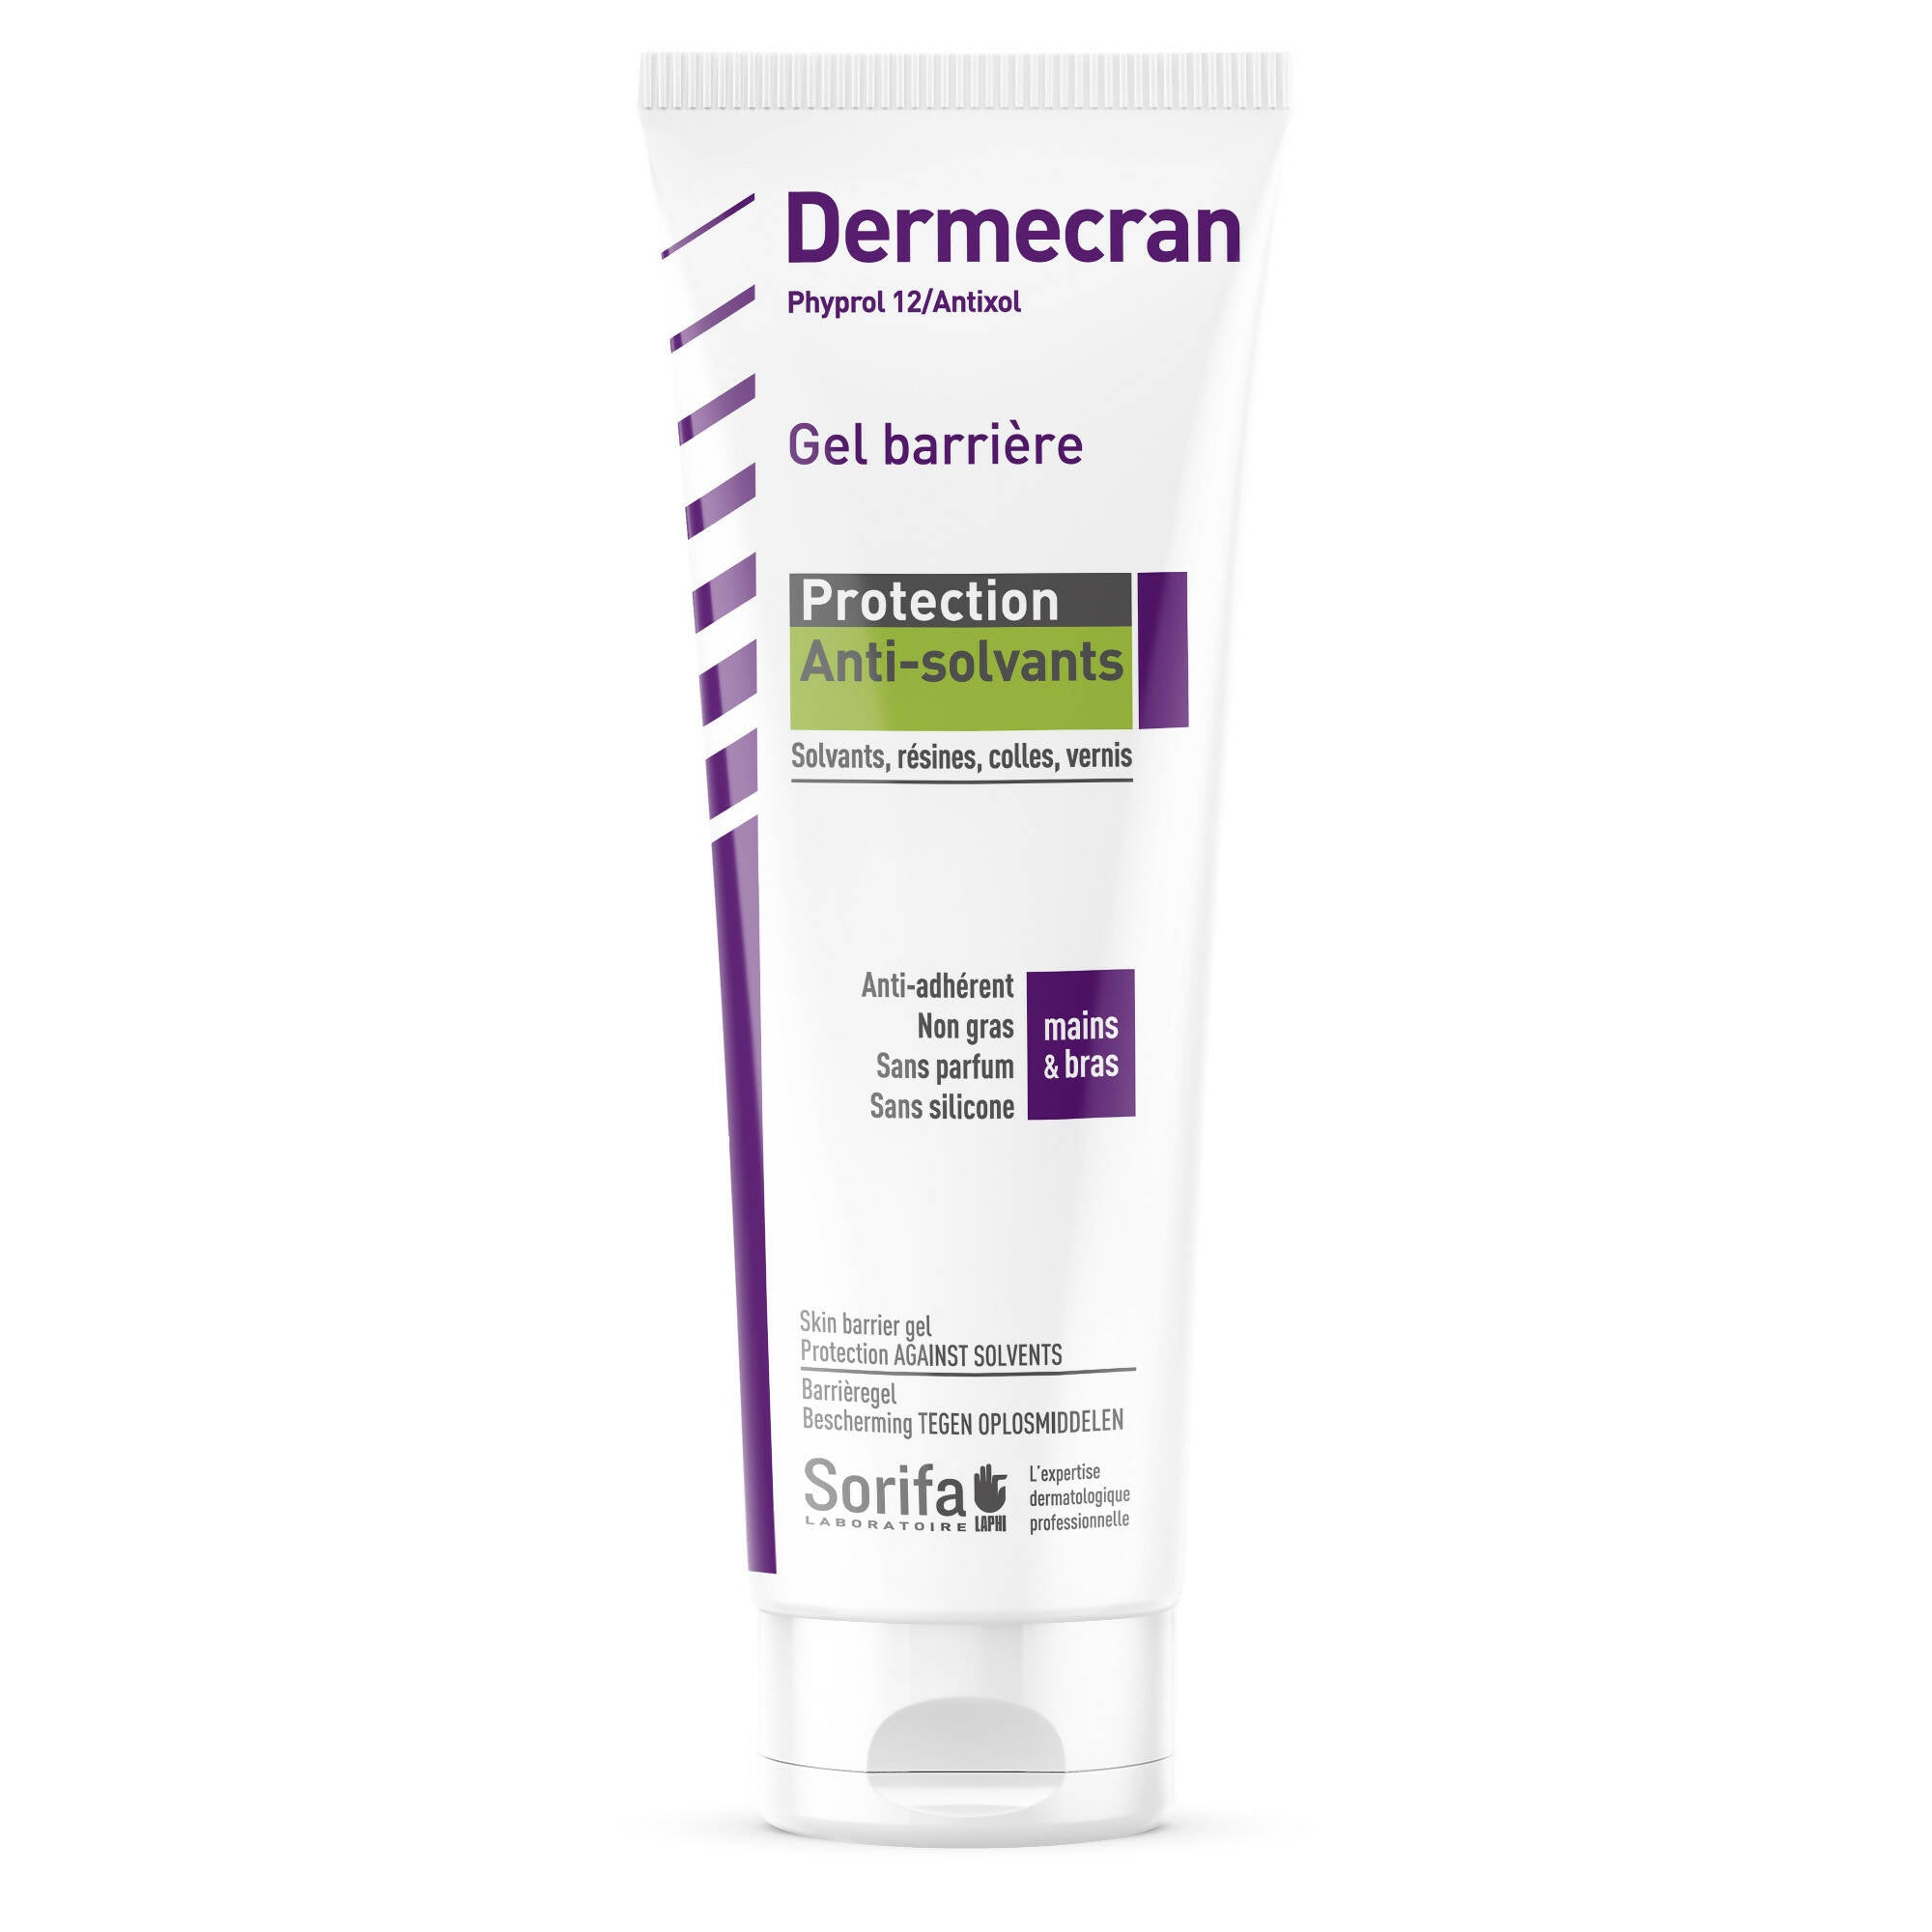 SORIFA - Set of 3 - Dermscreen - Barrier gel - Protection ANTI-SOLVENTS - Solvents, resins, glues, varnishes - Hands, face, body - High tolerance formula - Fragrance-free - 125 ml tube. - 0